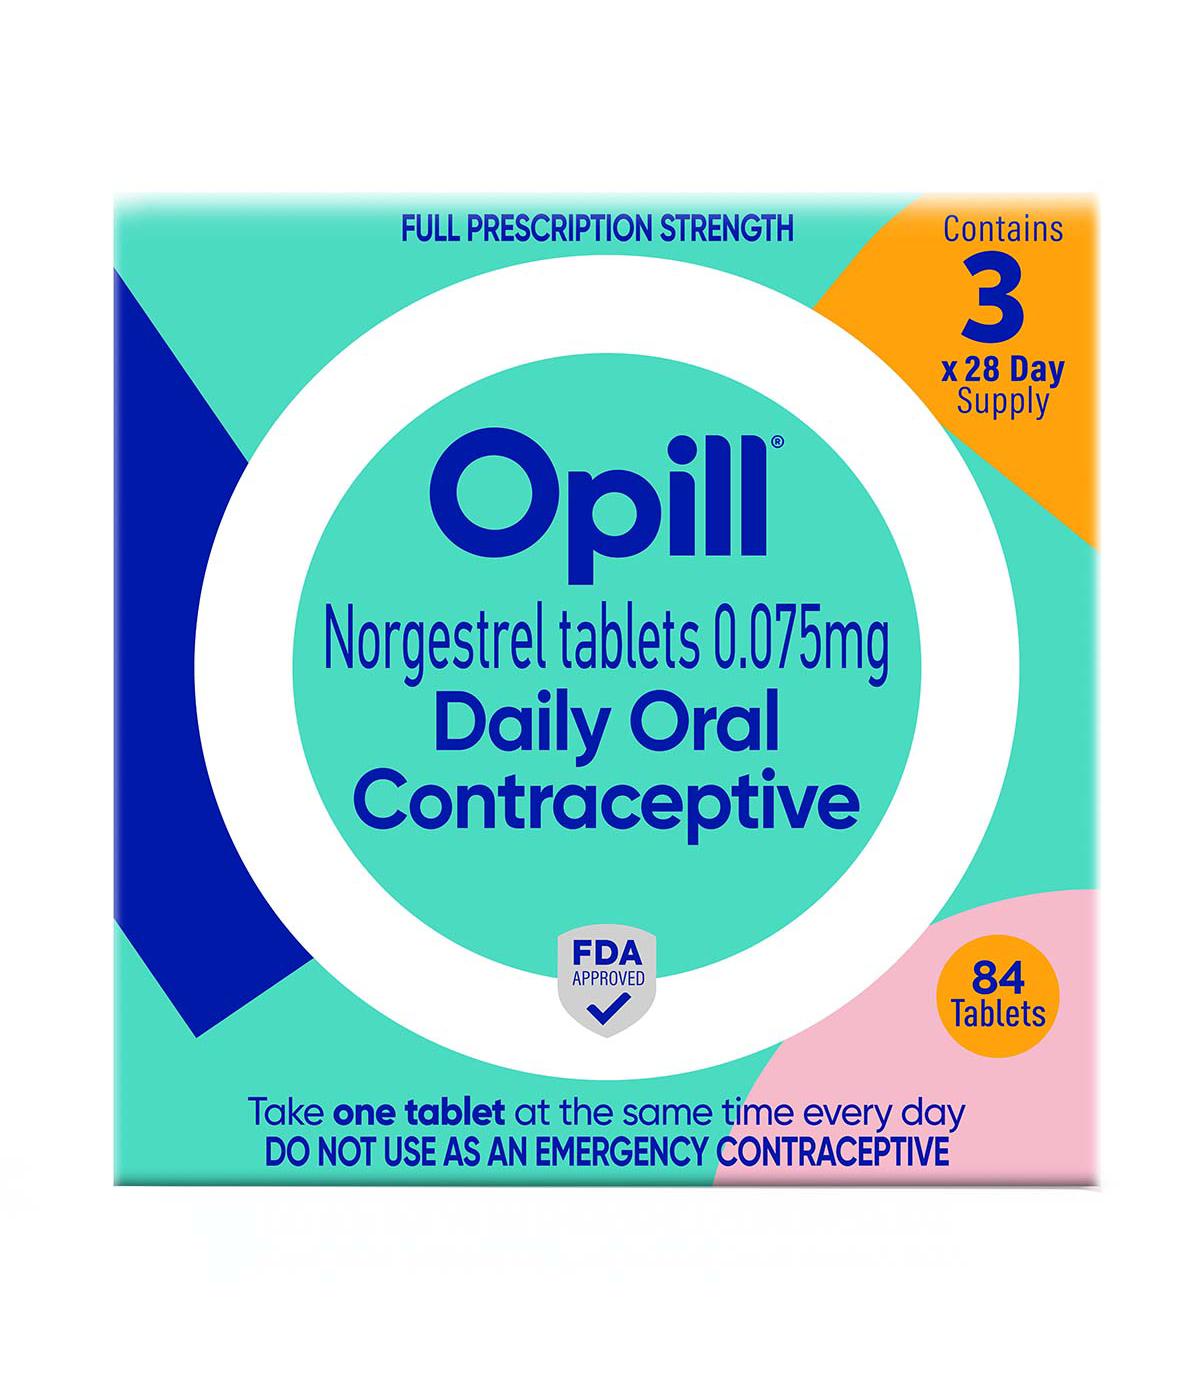 Opill Daily Oral Contraceptive Norgestrel Tablets - 0.075 mg; image 1 of 10